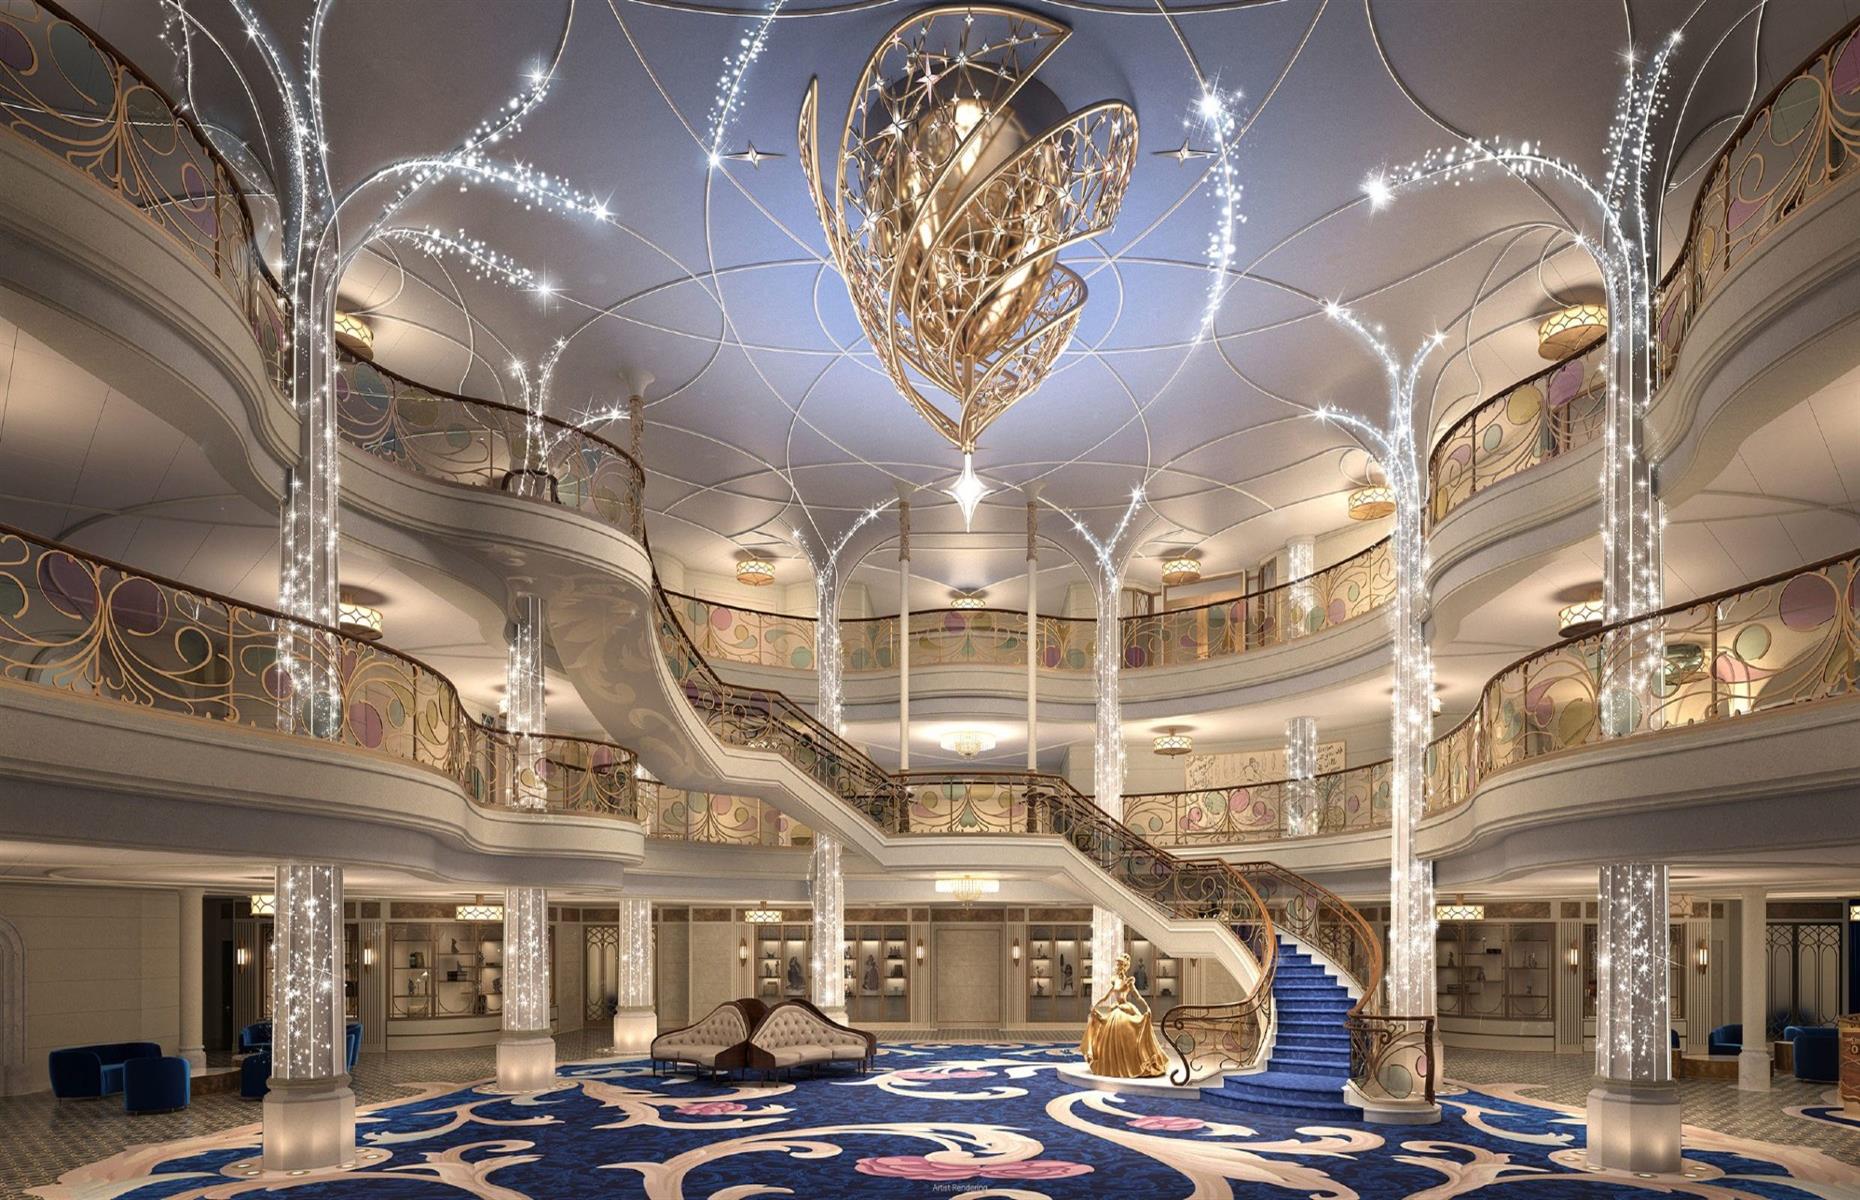 <p>Disney Cruise Line’s imagineers have once again created a world of enchantment, this time aboard the <a href="https://disneycruise.disney.go.com/why-cruise-disney/wish/">Disney Wish</a>. The ship welcomed her first guests in summer 2022 and has a distinctly Disney design concept inspired by timeless tales. The motif of 'enchantment' manifests throughout the ship, from the magical forest setting of the Walt Disney Theatre and storybook-inspired staterooms to the fairy-tale-castle Grand Hall, where a dazzling wishing star descends from the shimmering chandelier above.</p>